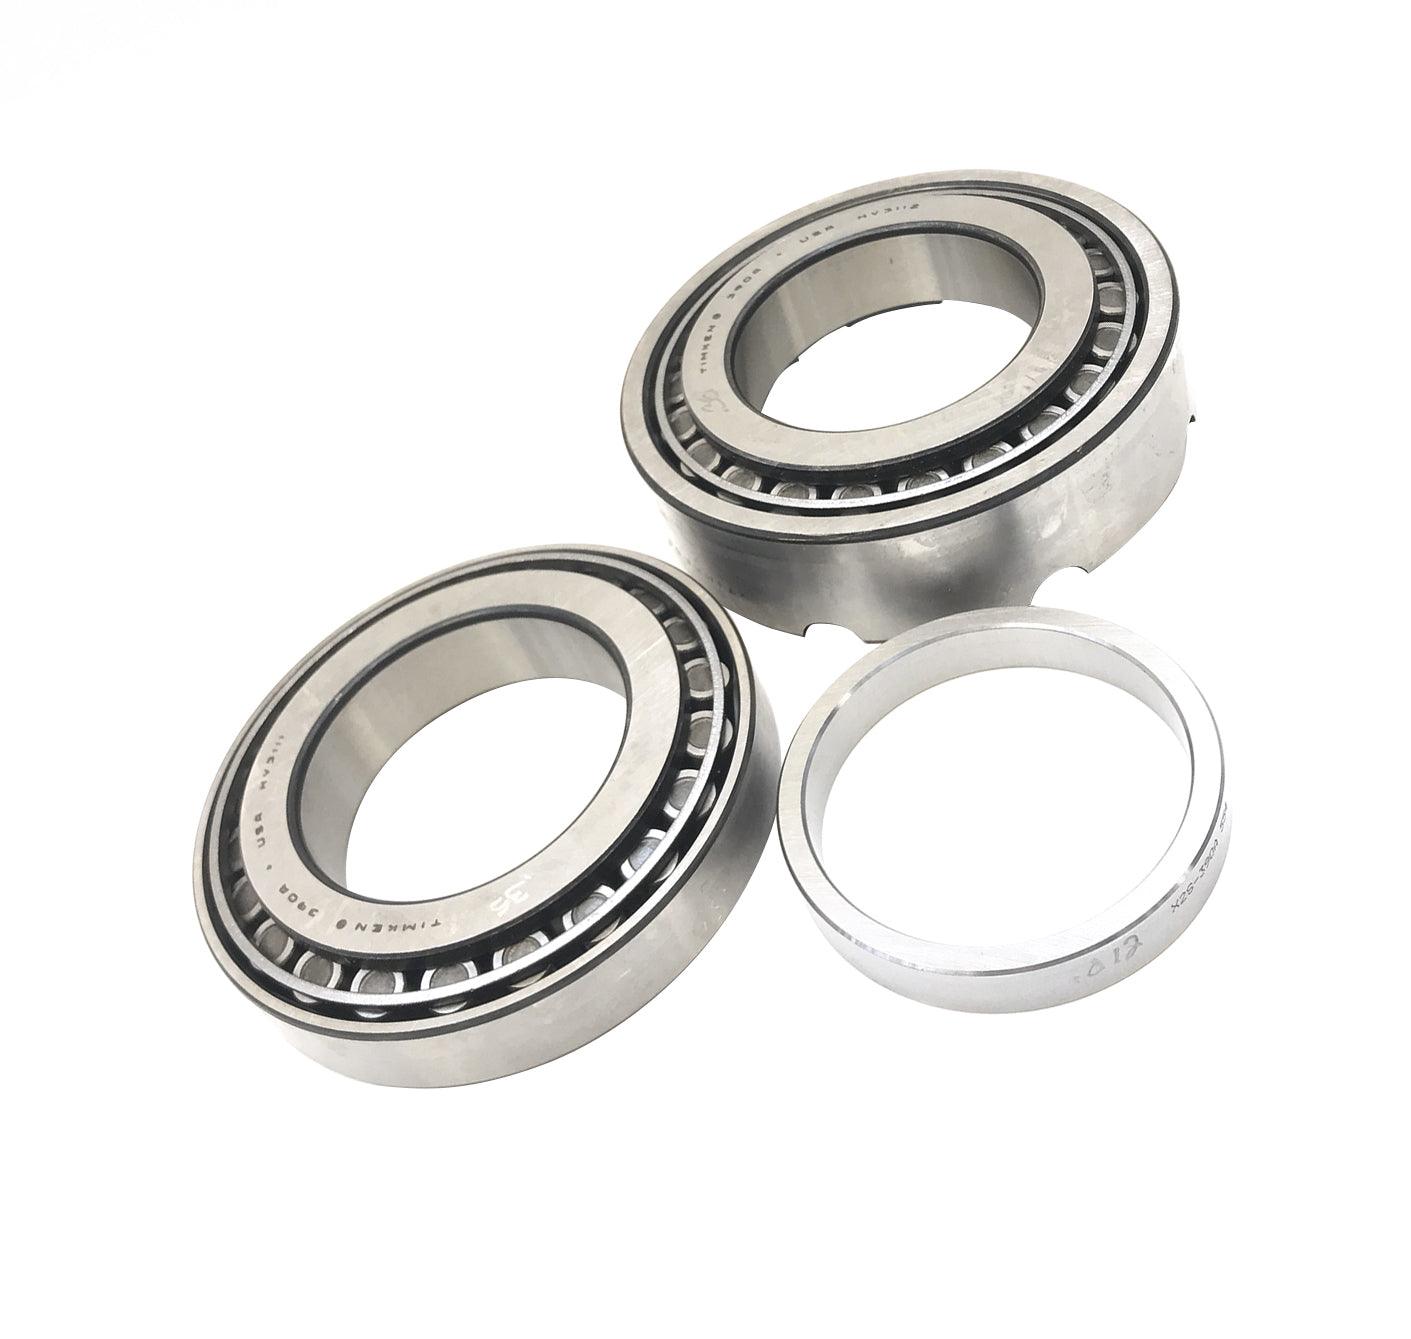 390A-902B1 Timken® Output Bearing Package For Rockwell Meritor Transmission 9 10 - ADVANCED TRUCK PARTS